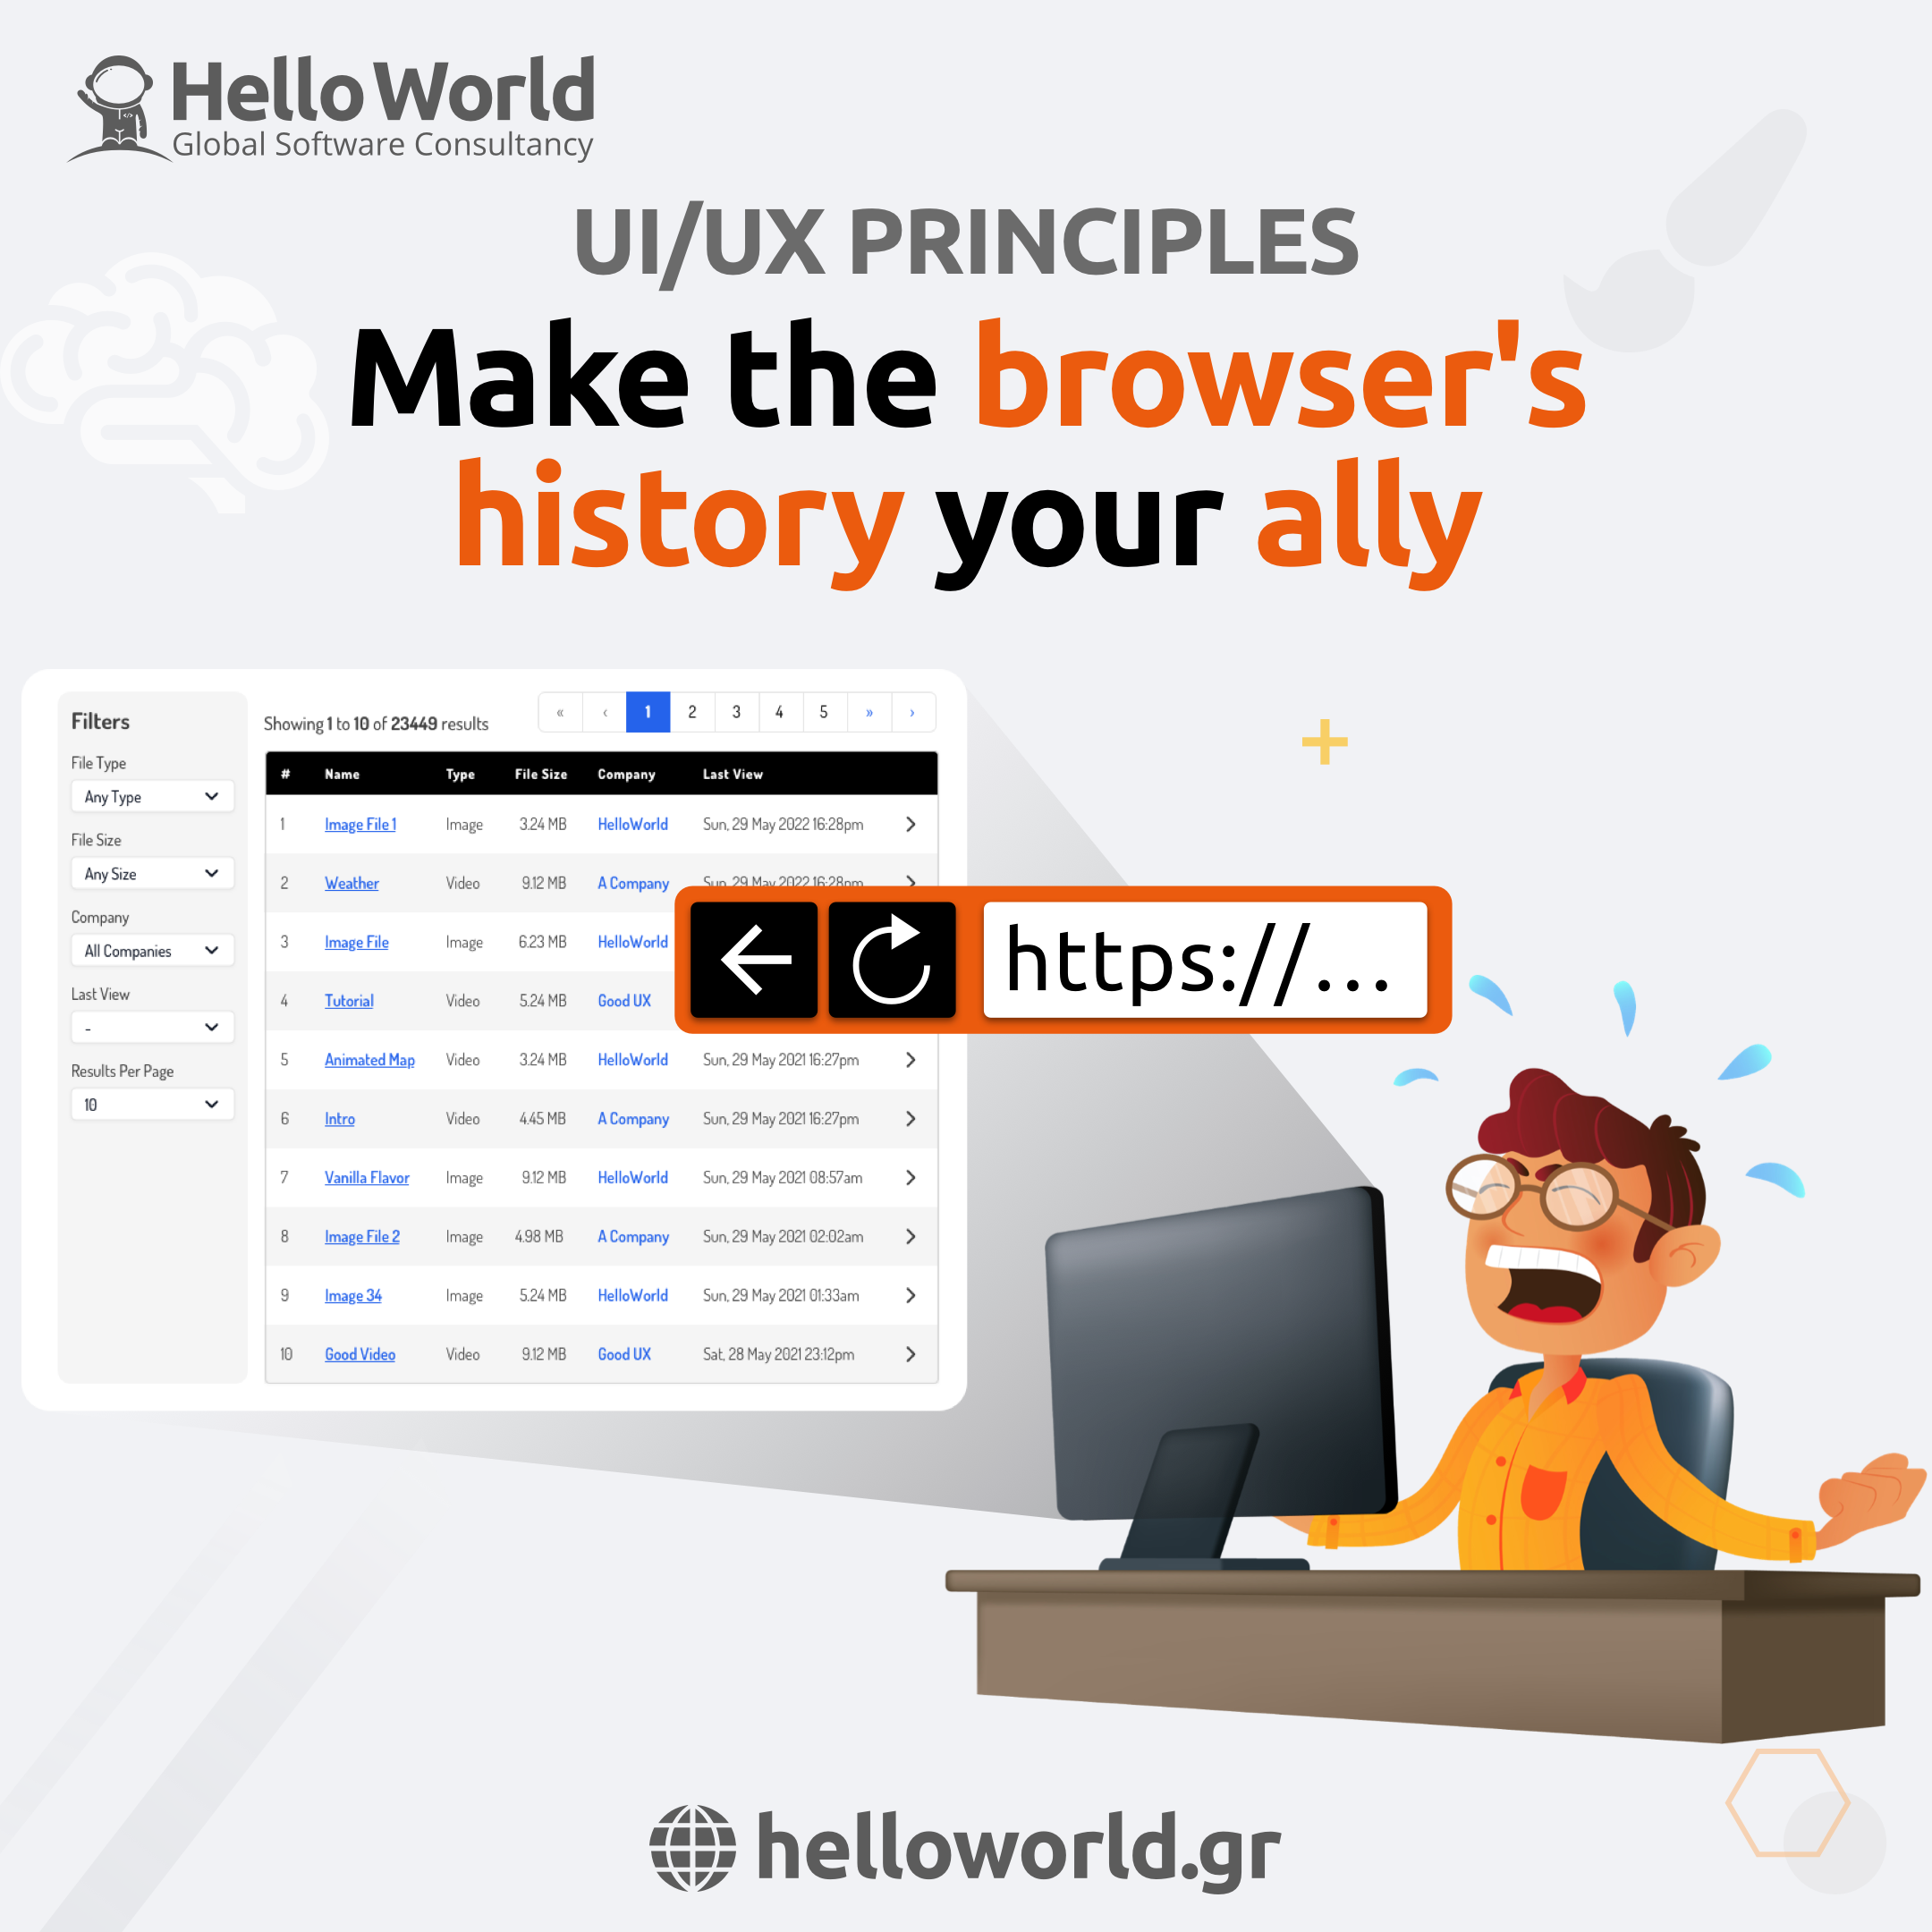 Make the browser’s history your ally